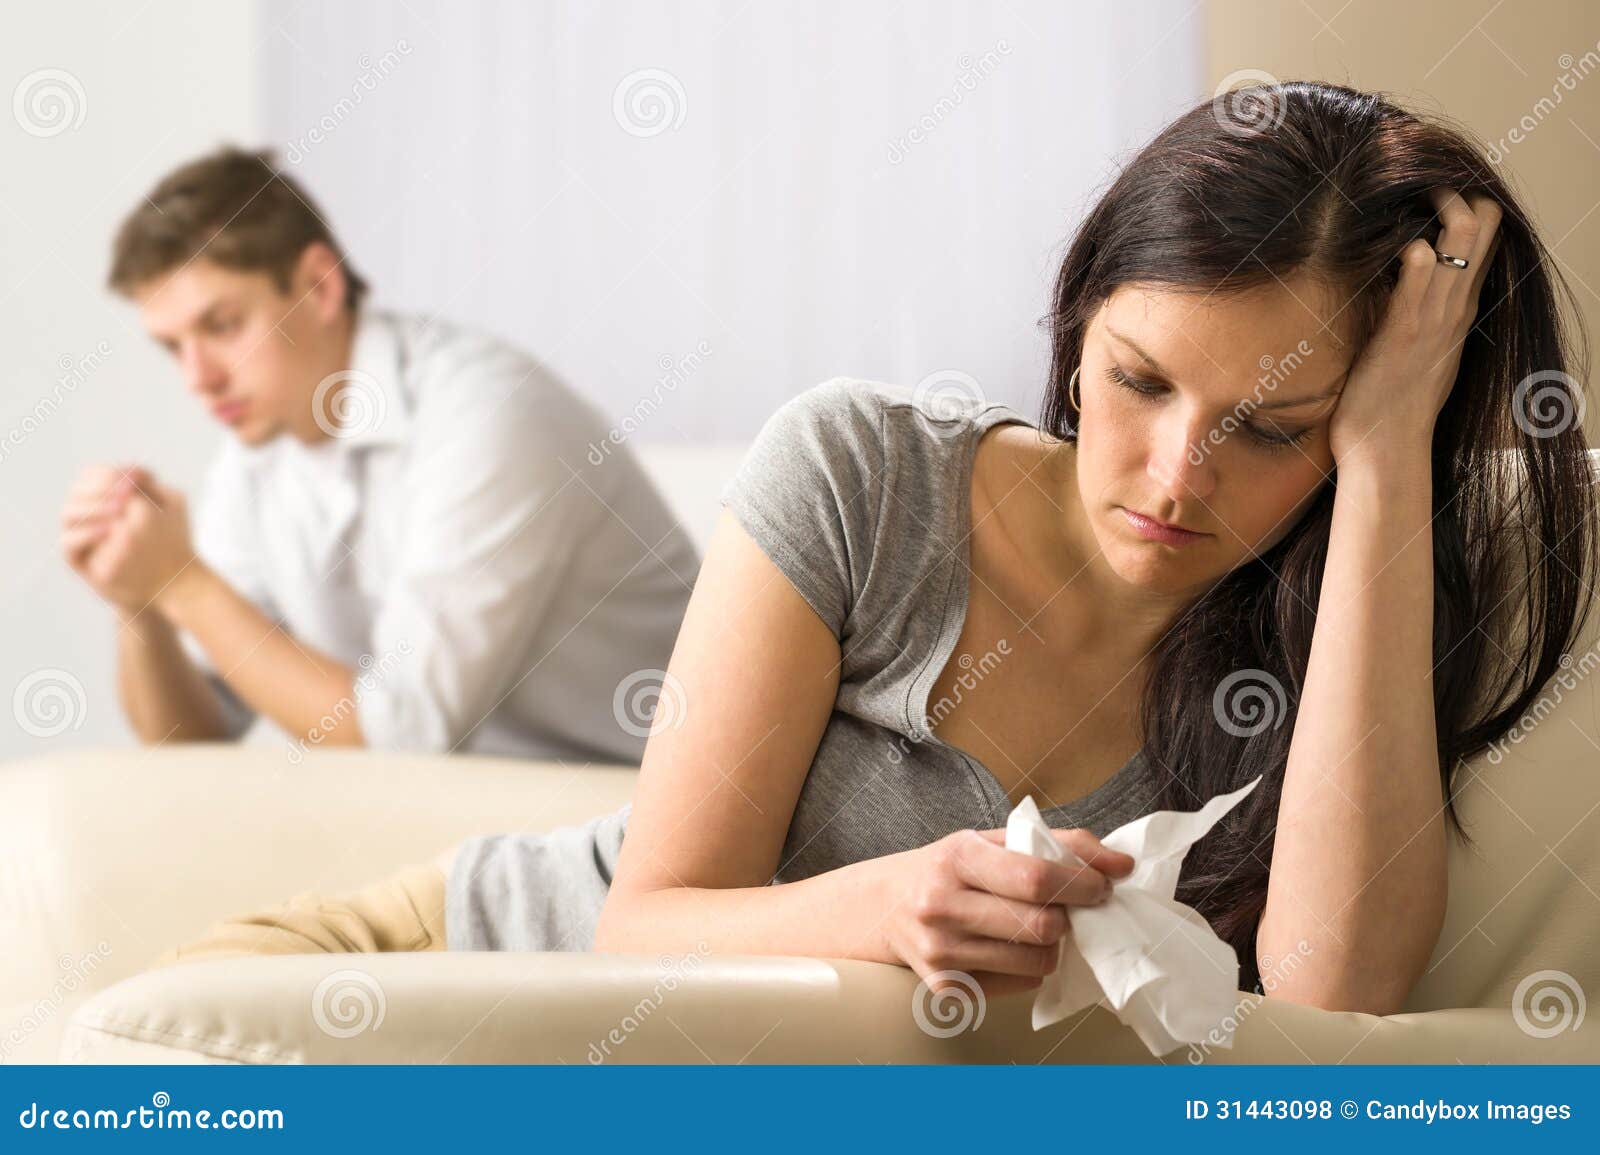 young couple mad at each other home